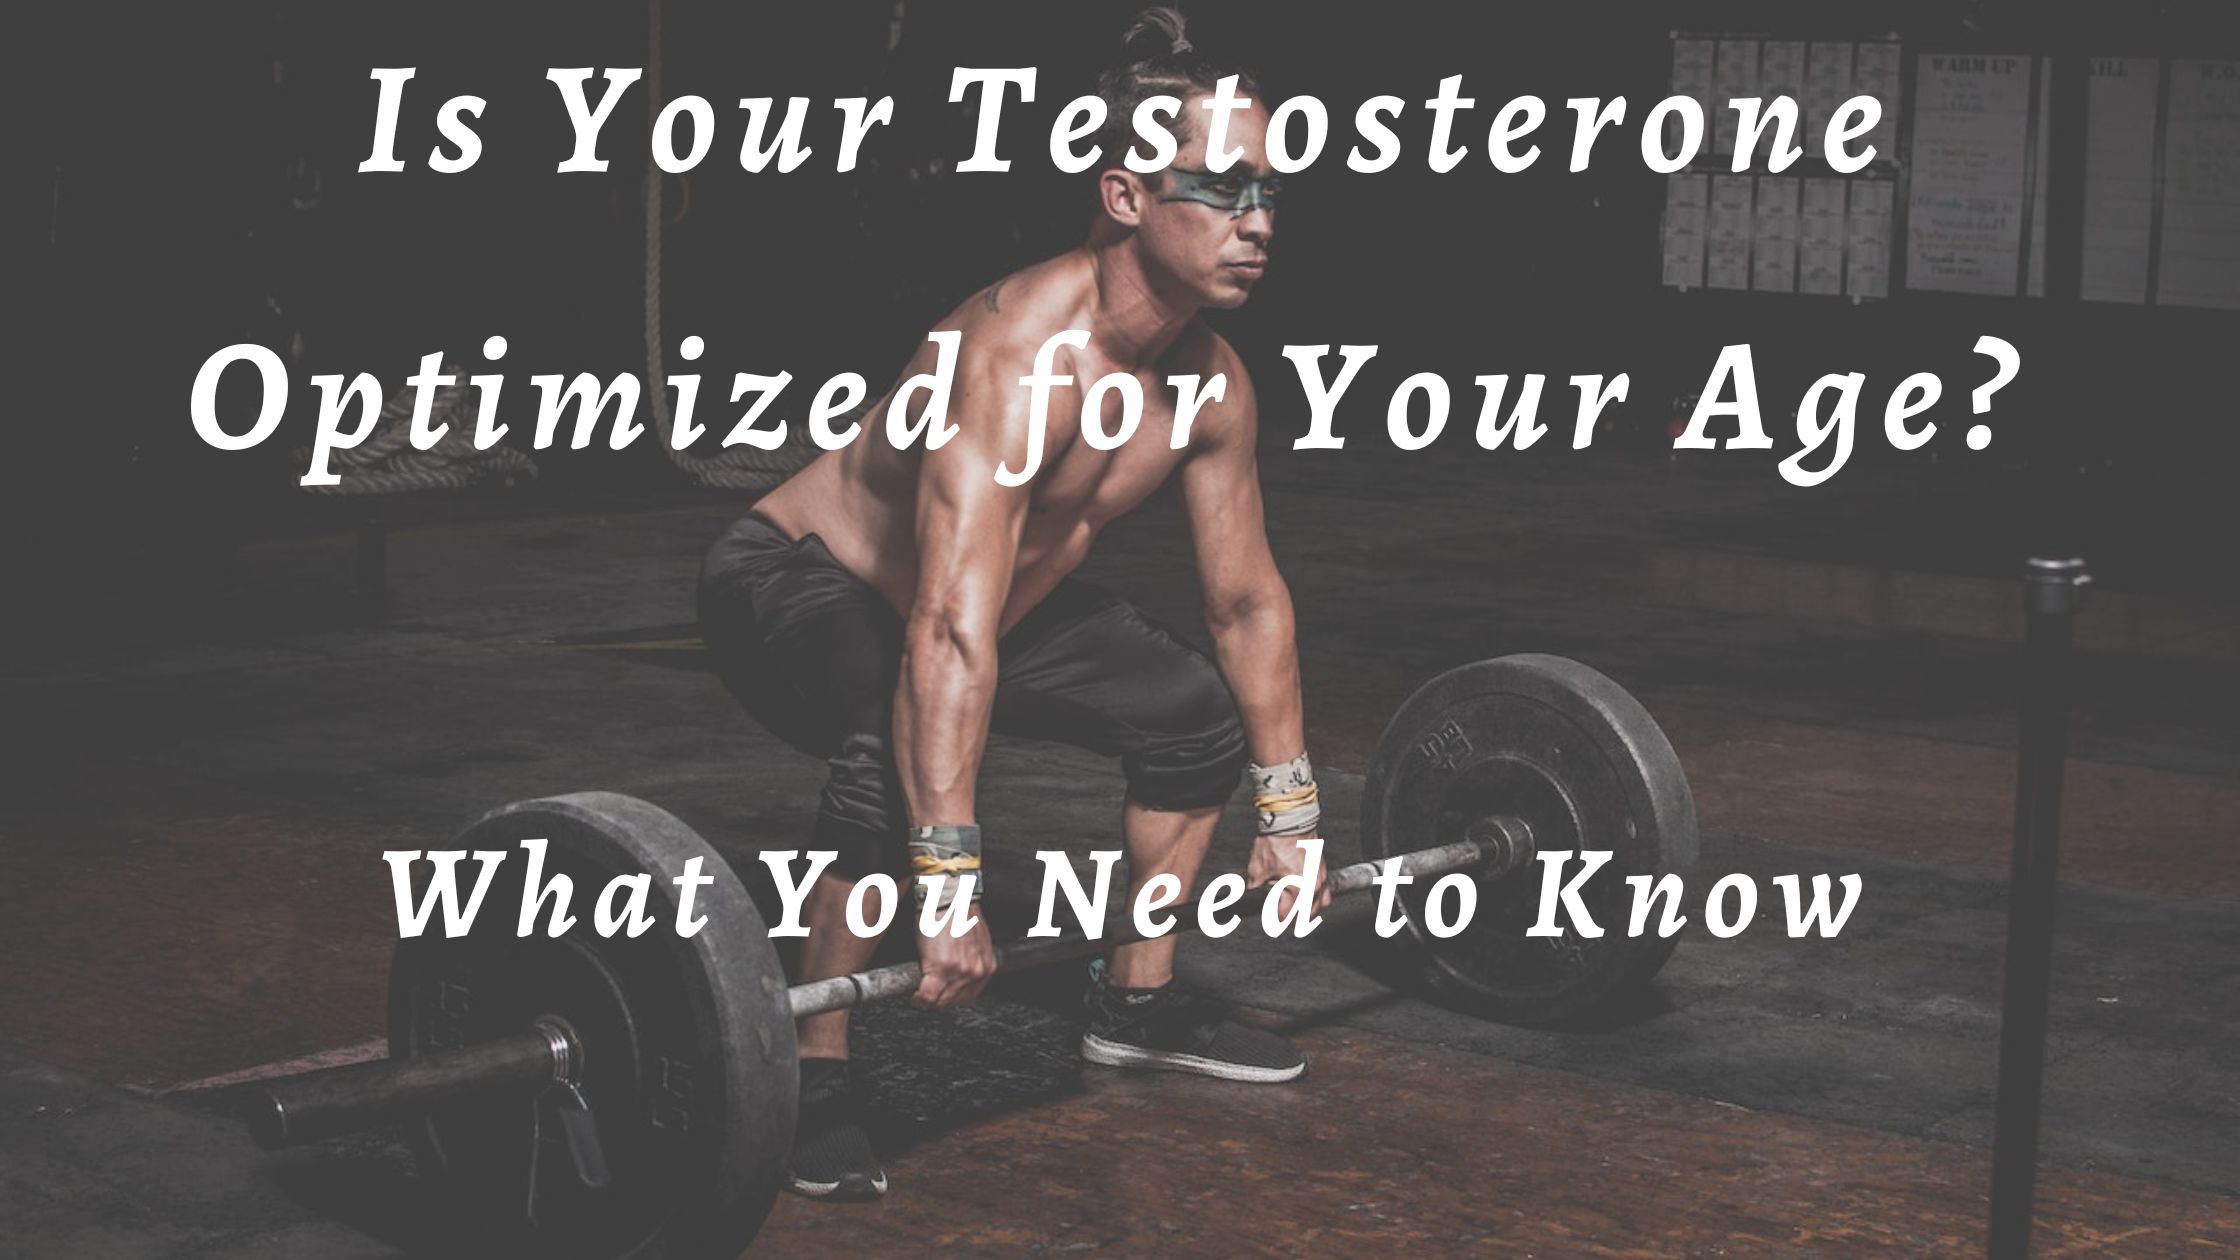 You are currently viewing Is Your Testosterone Optimized for Your Age? What You Need to Know